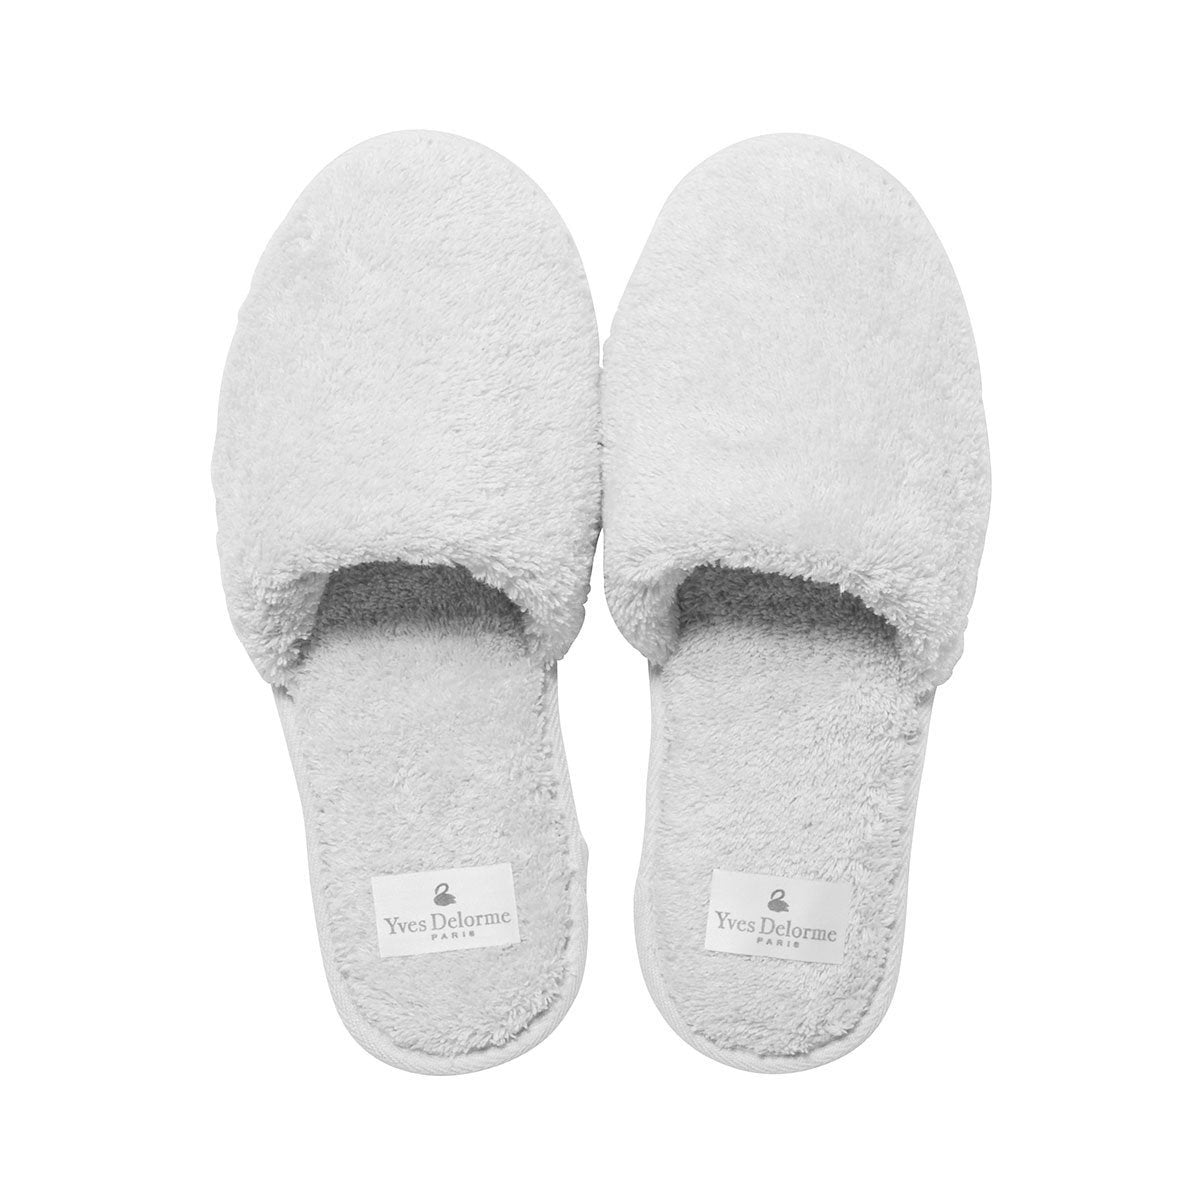 Etoile Blanc Women's Slippers by Yves Delorme | Fig Linens - White Slippers